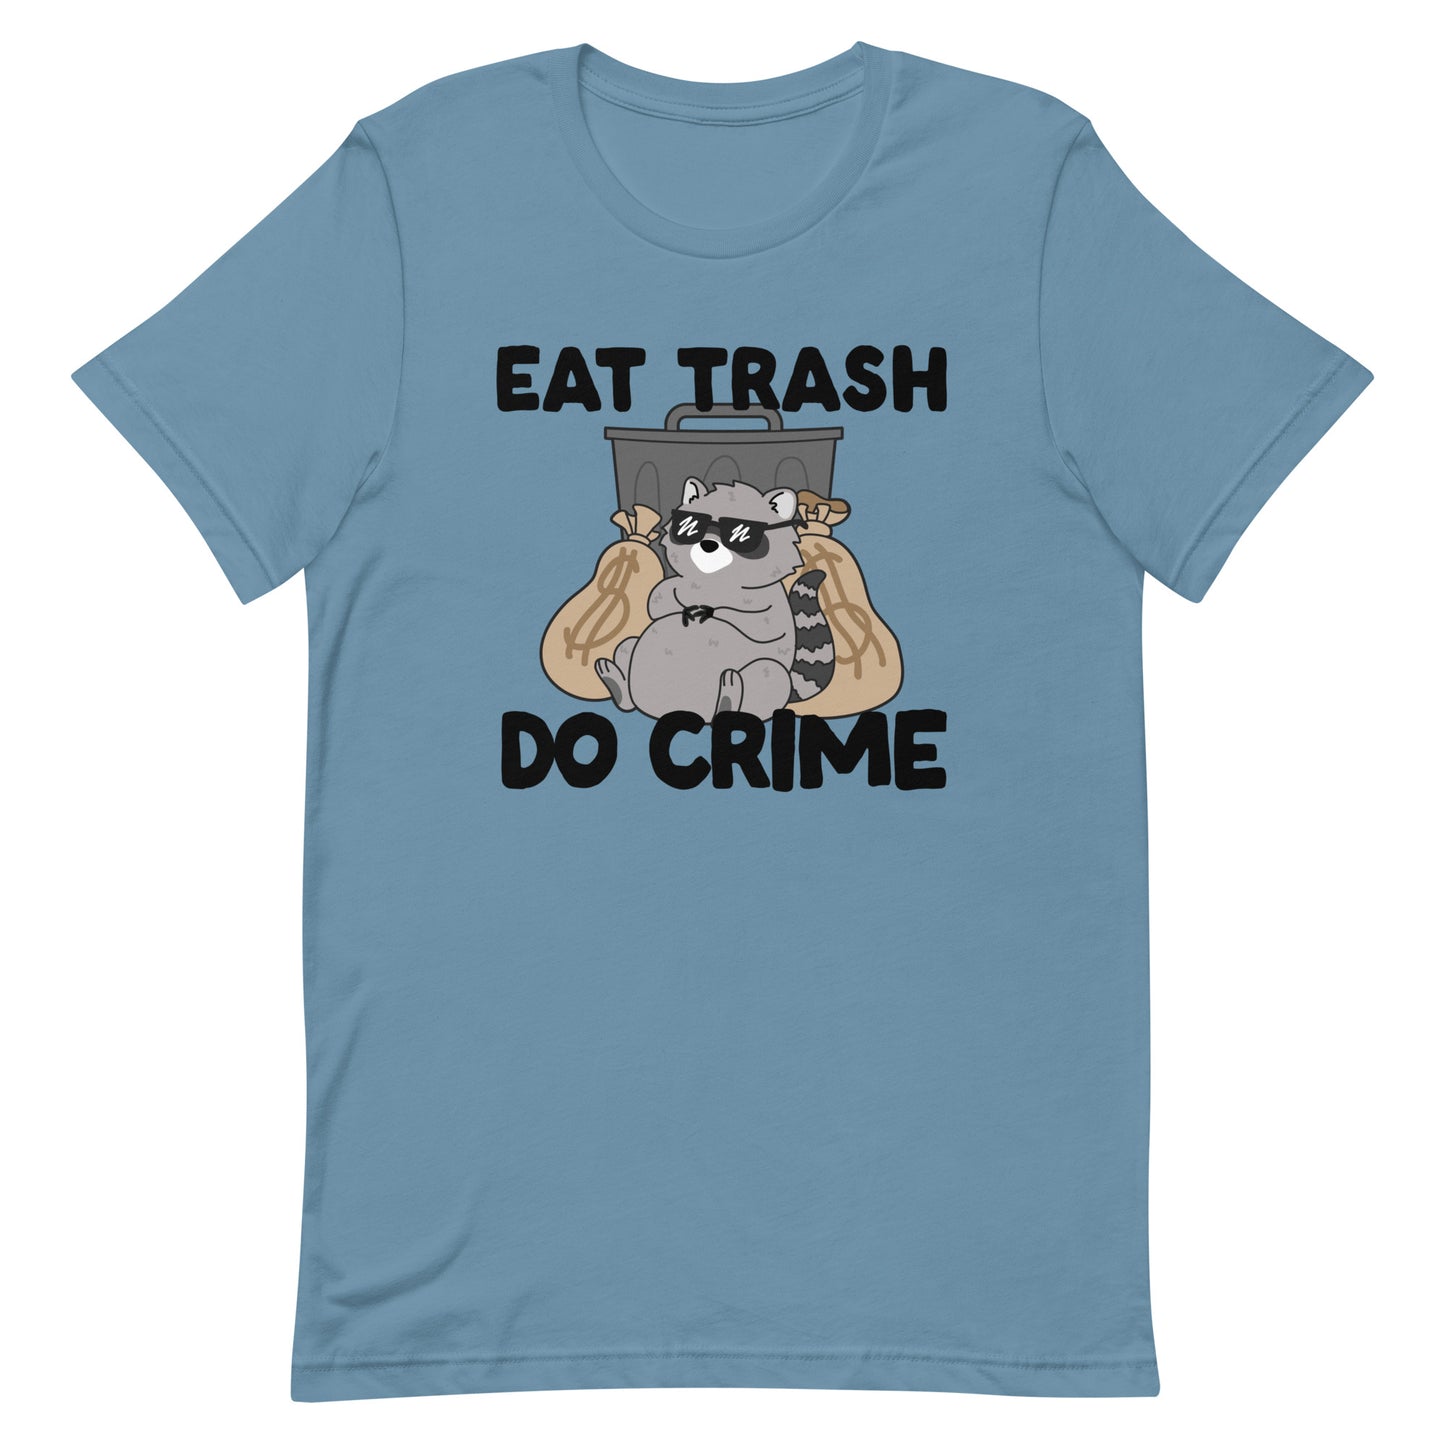 A blue crewneck t-shirt featuing an illustration of a chubby raccoon wearing sunglasses. The raccoon is laying back against a trash can and large bags of money. Text surrounding the image reads "Eat trash. Do crime."